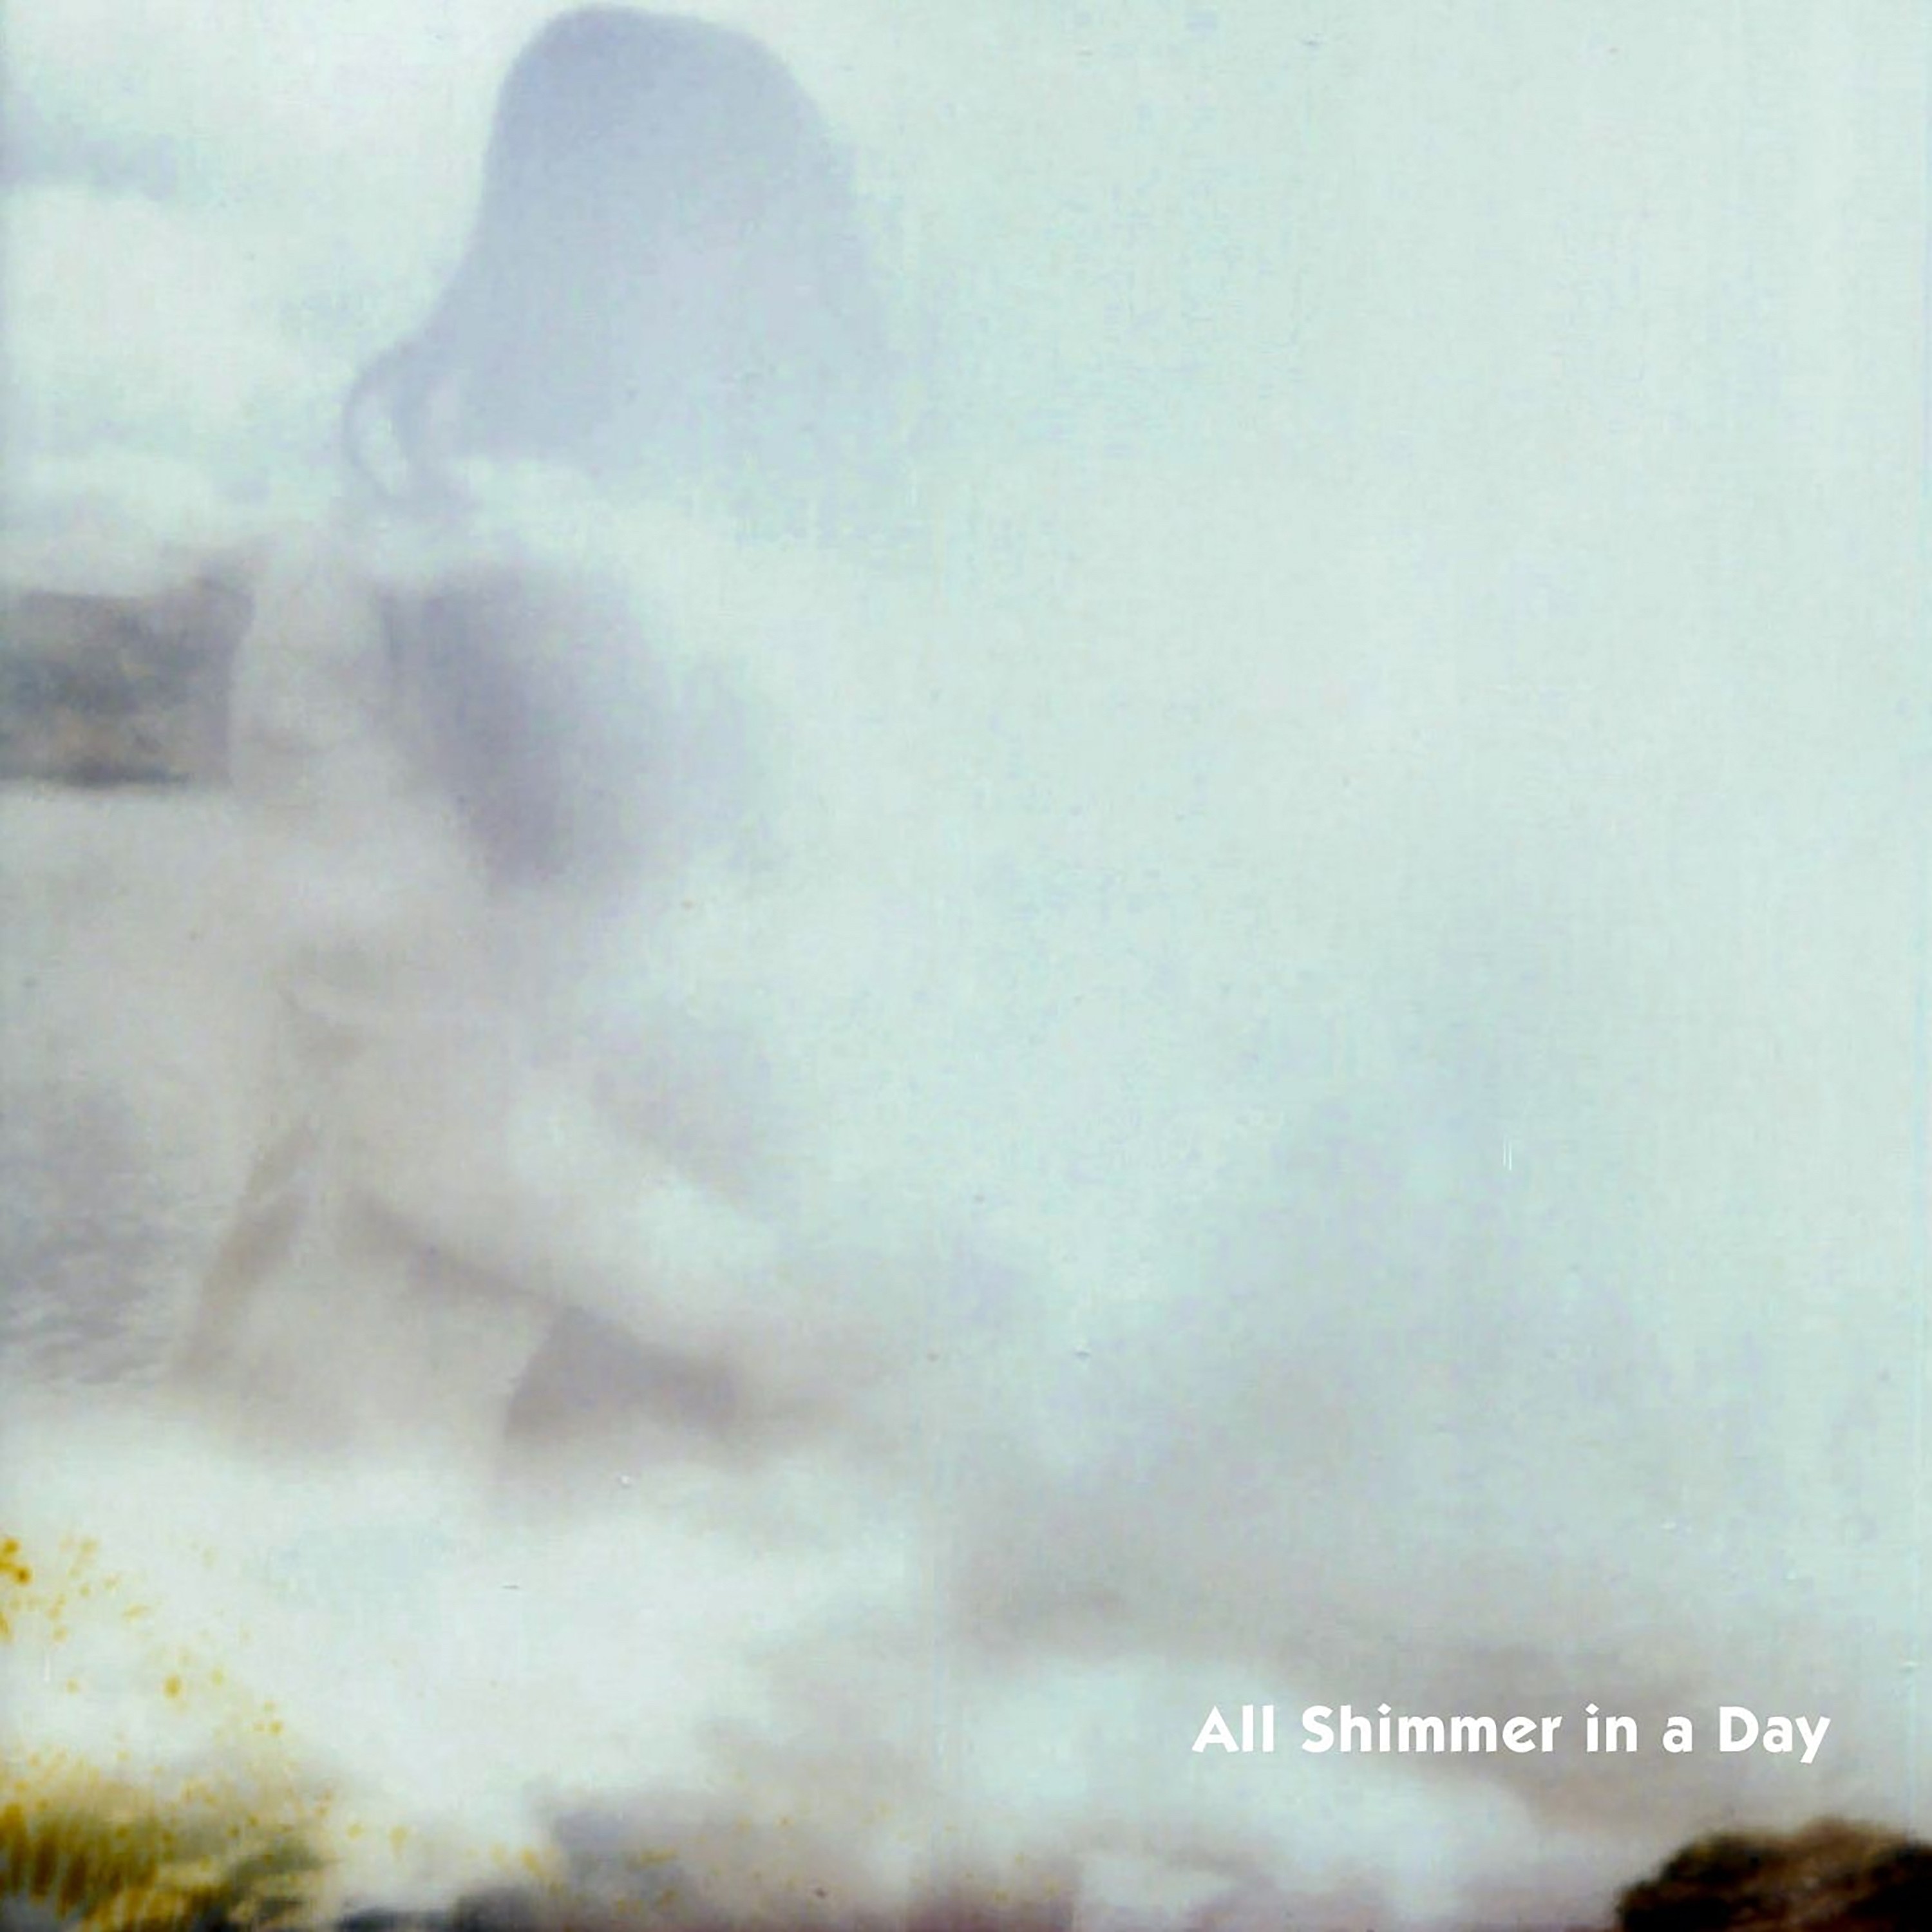 My Lucky Day – All Shimmer in a Day [FLAC / 24bit Lossless / WEB] [2021.03.03]